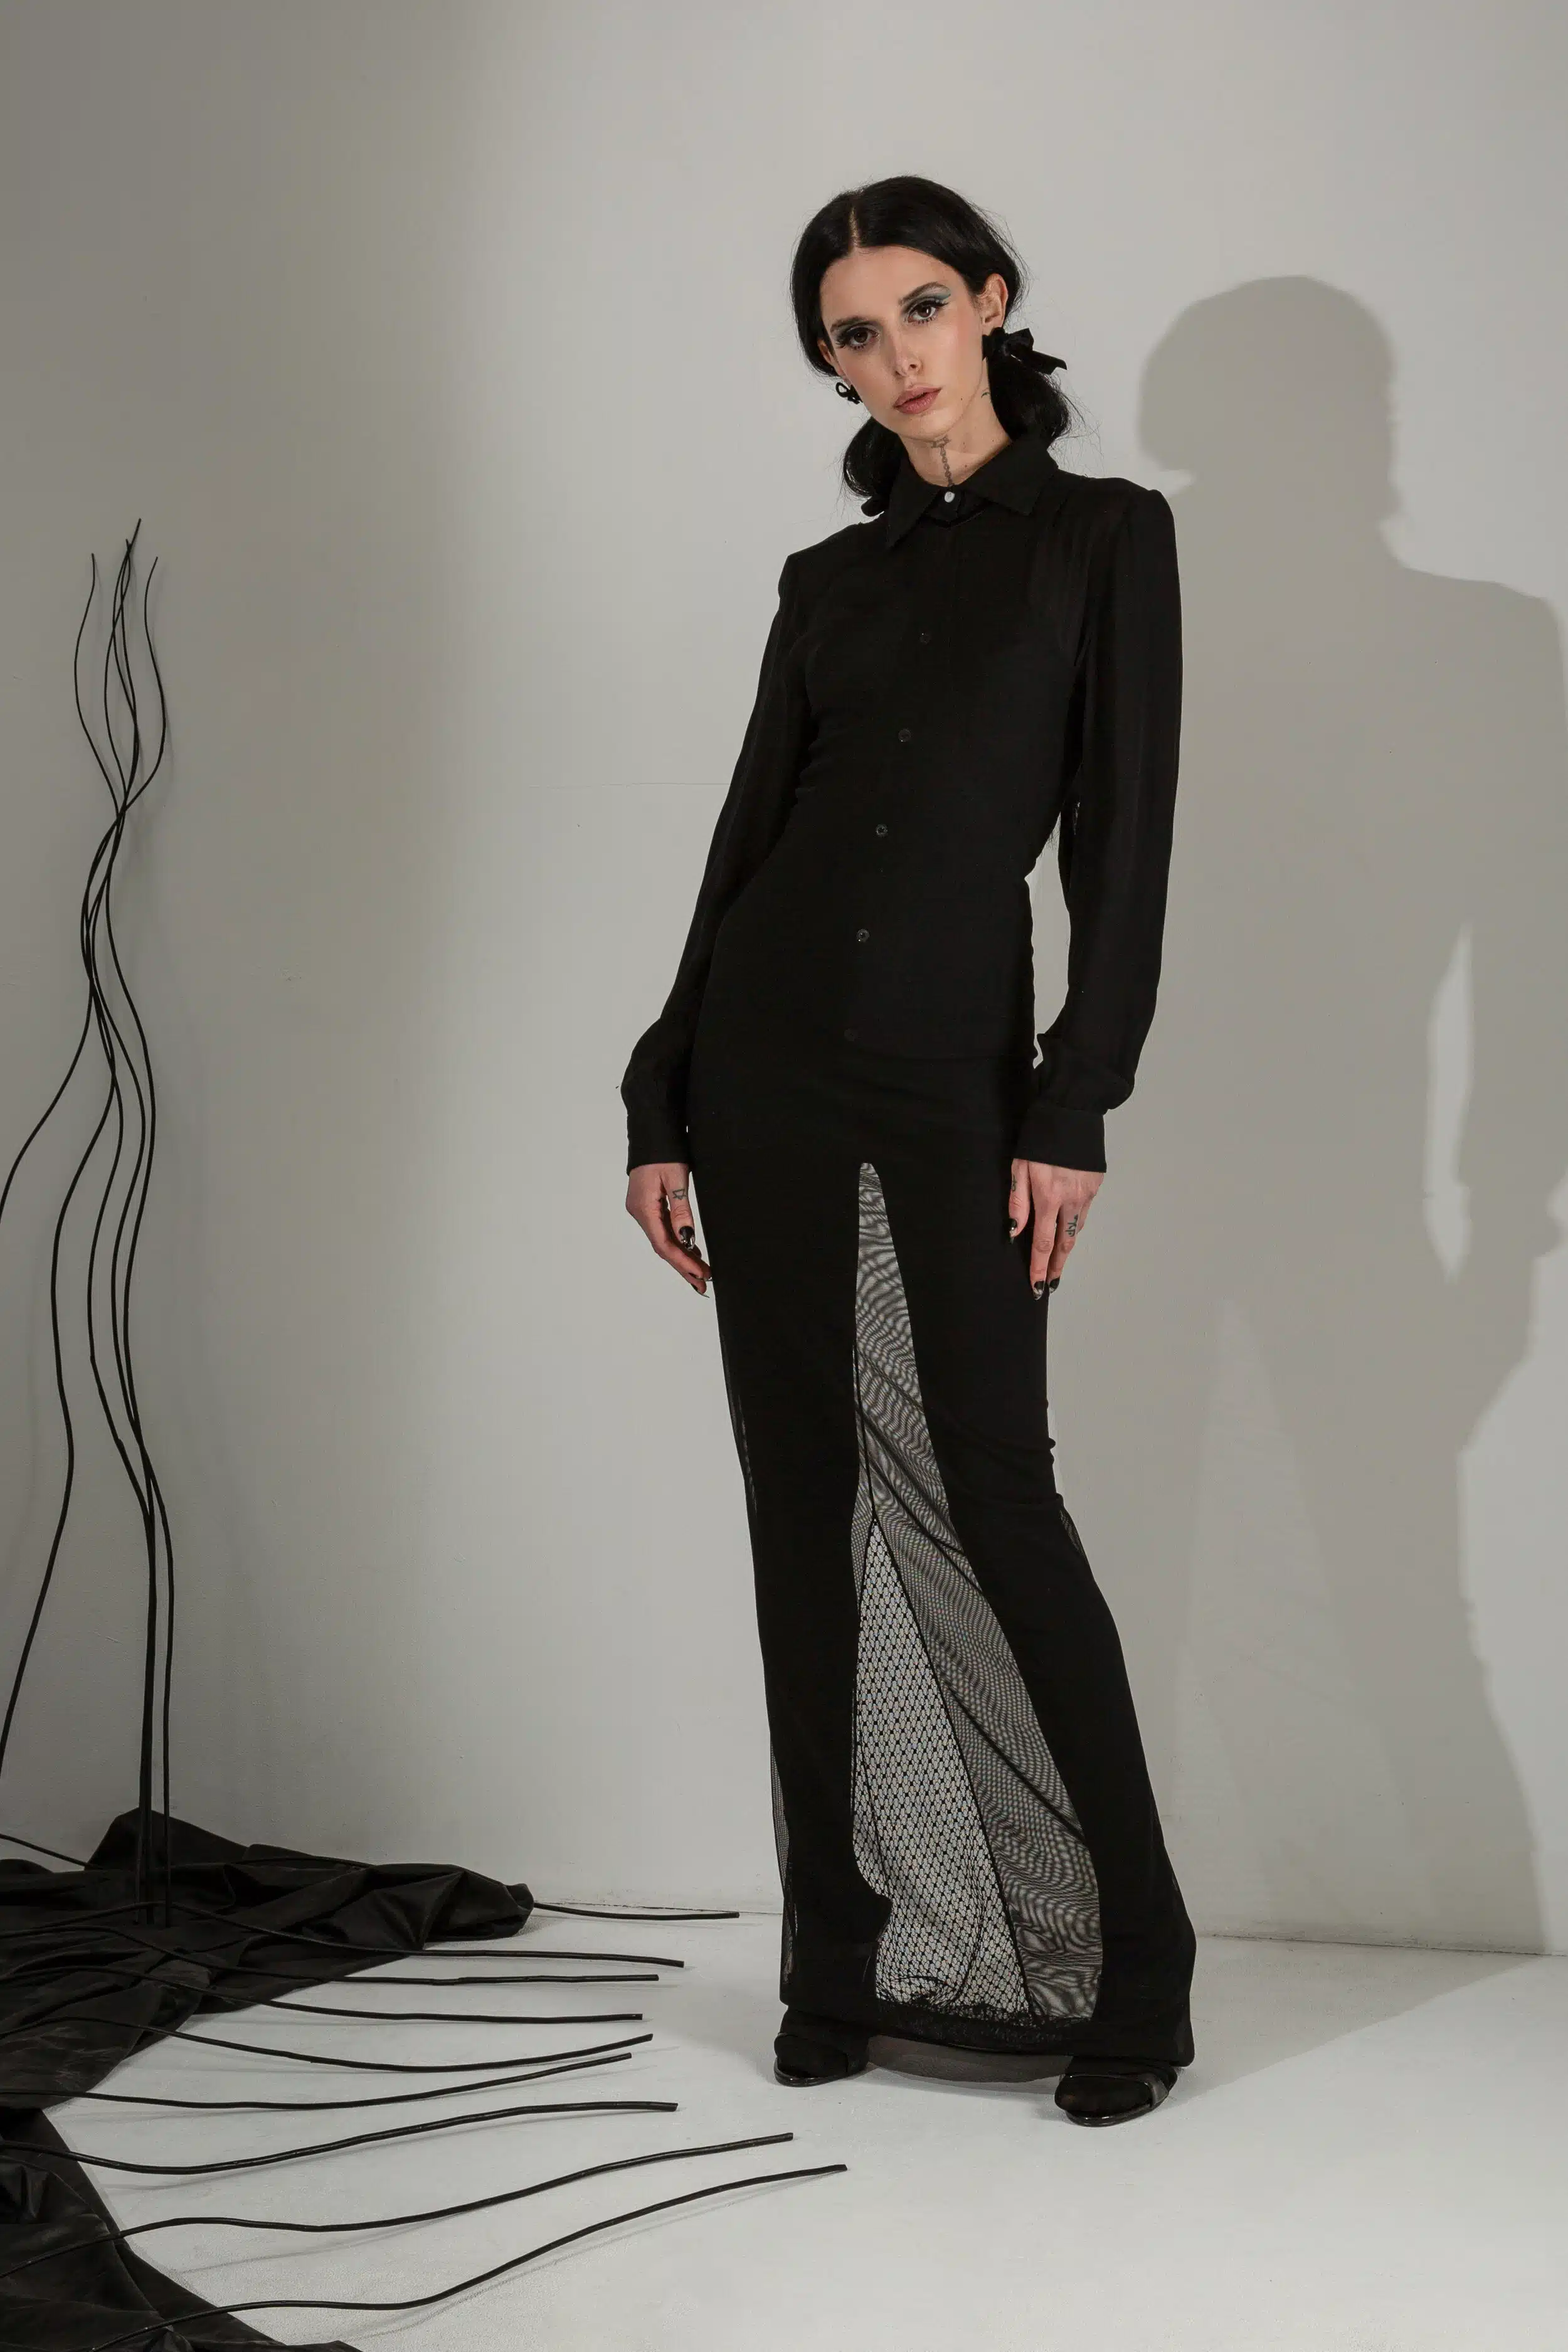 Image from FW21 Collection